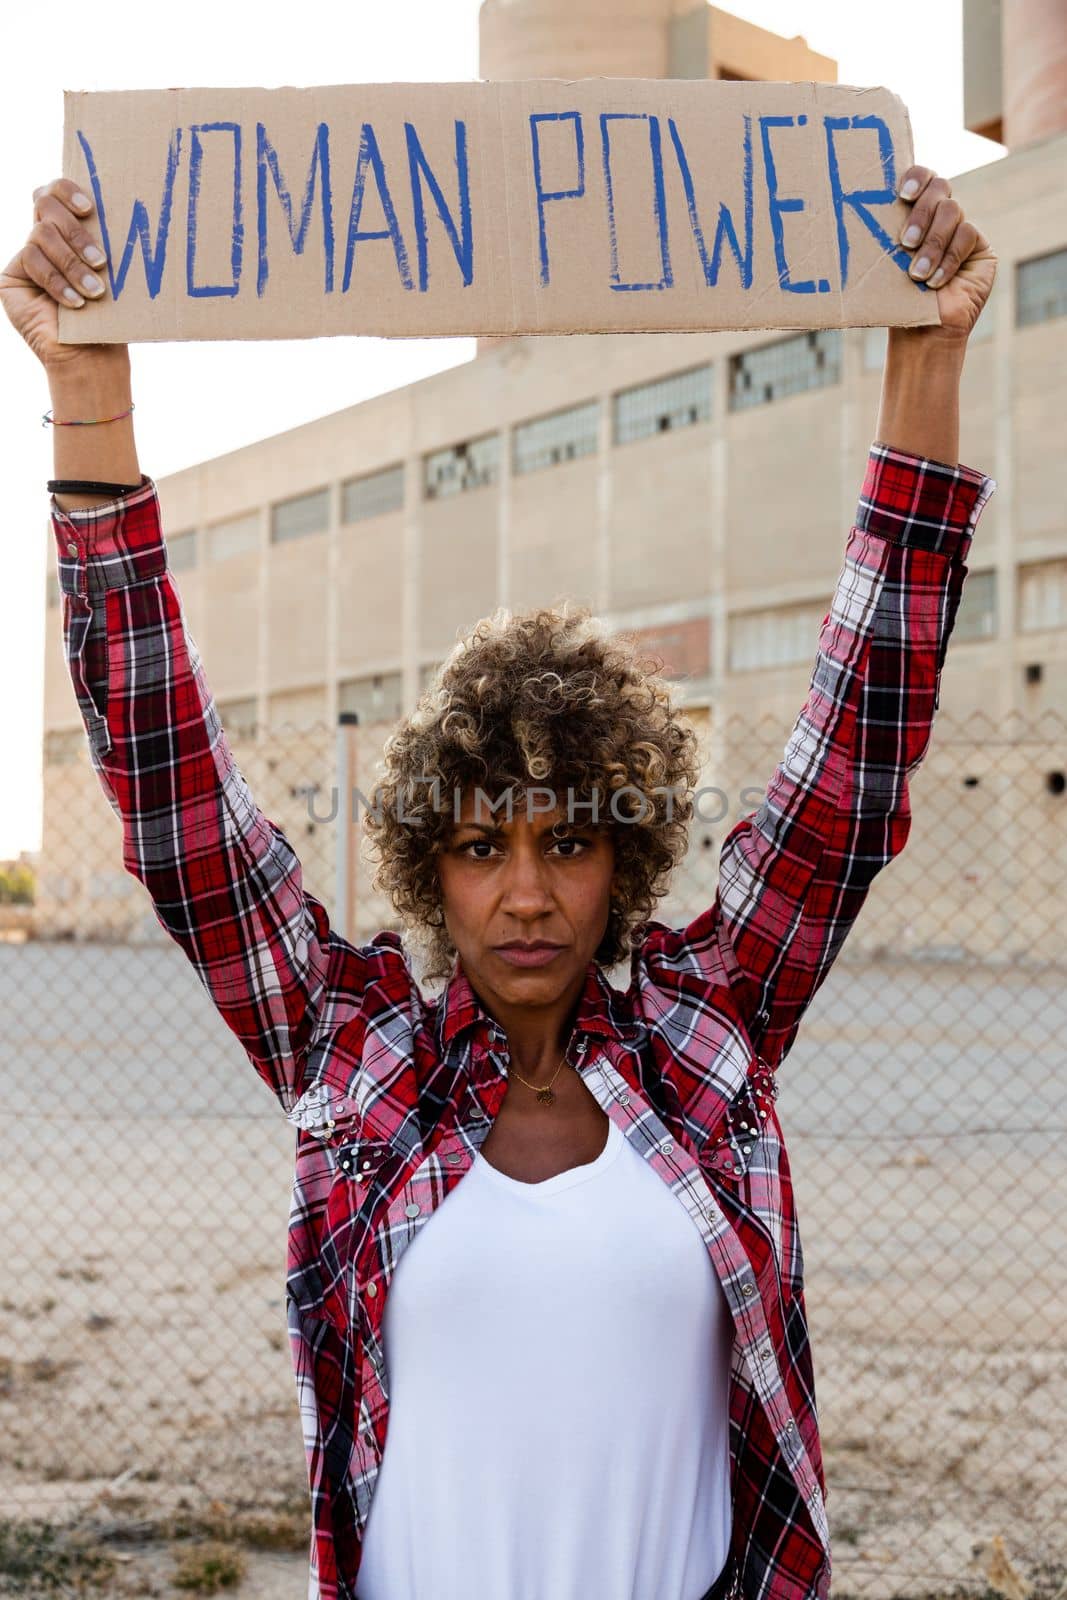 Confident African american demonstration protester looking at camera holding a woman power sign above her head. by Hoverstock